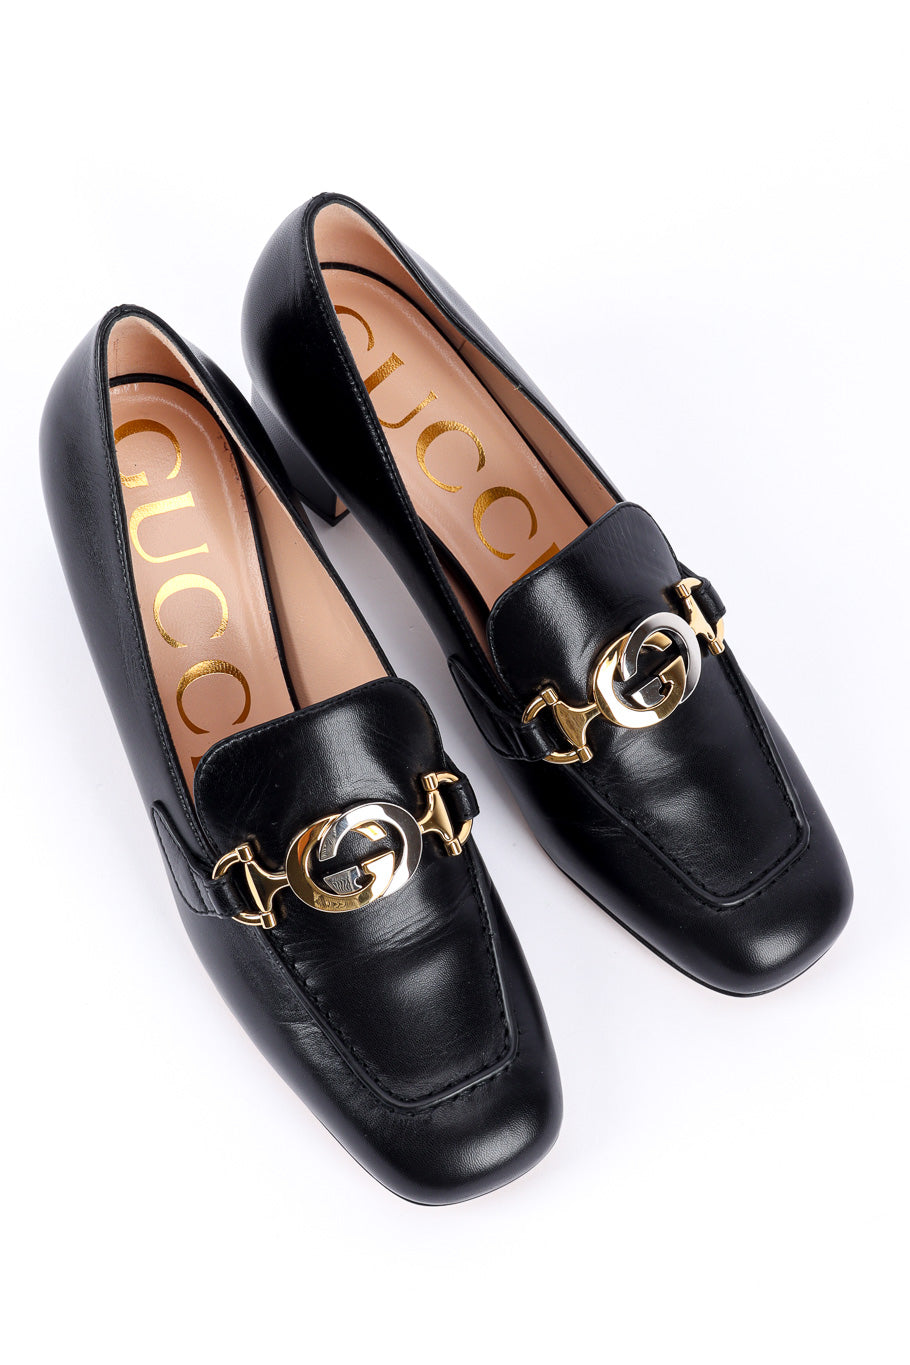 Horsebit loafers by Gucci on white background from above @recessla